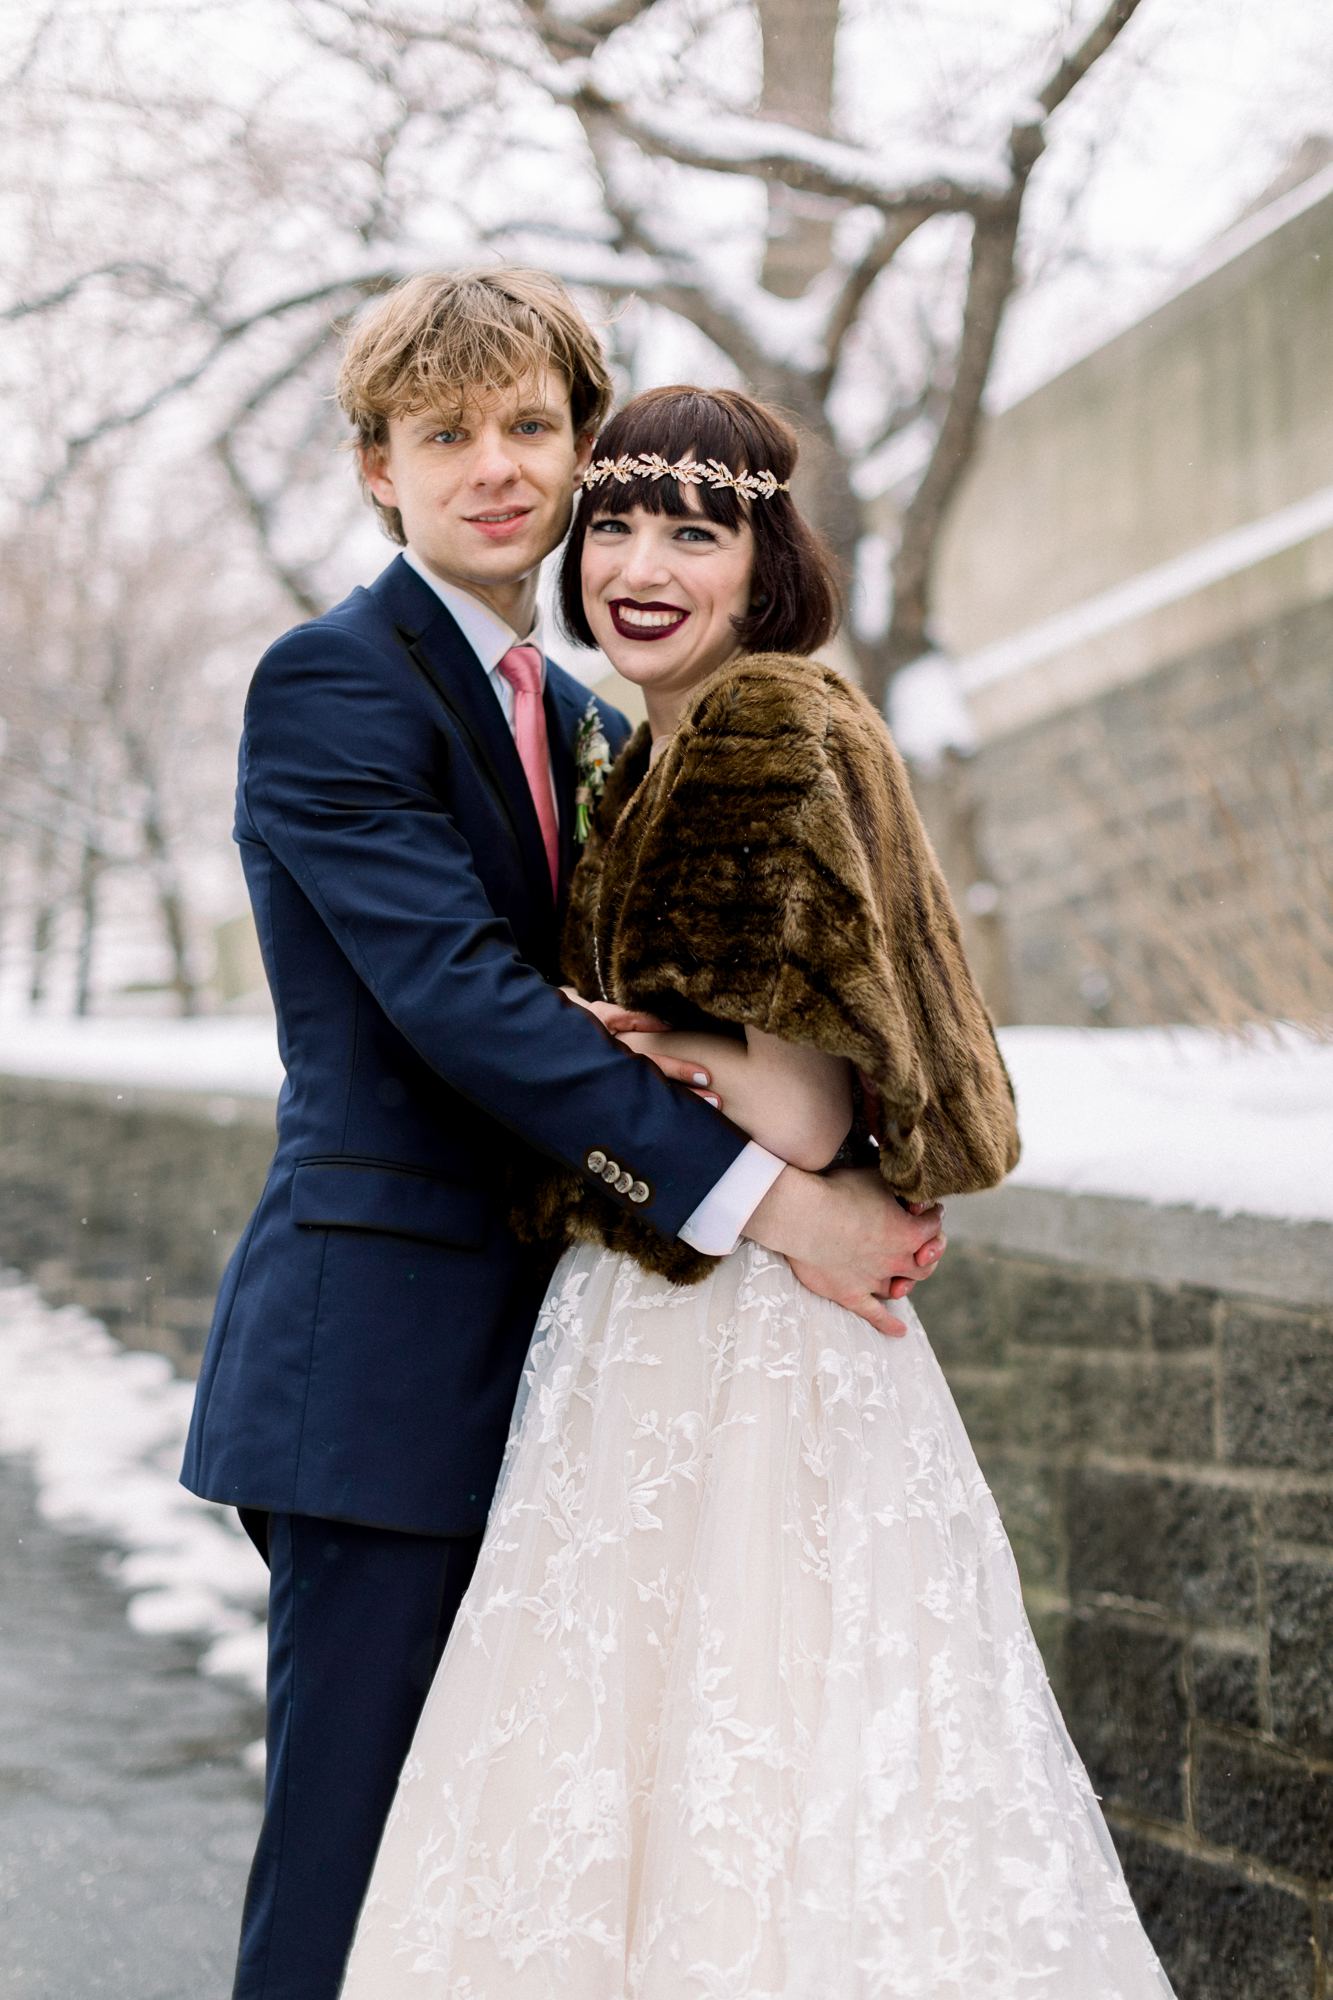 Fun and Candid NYC Winter Wedding in Riverside Park